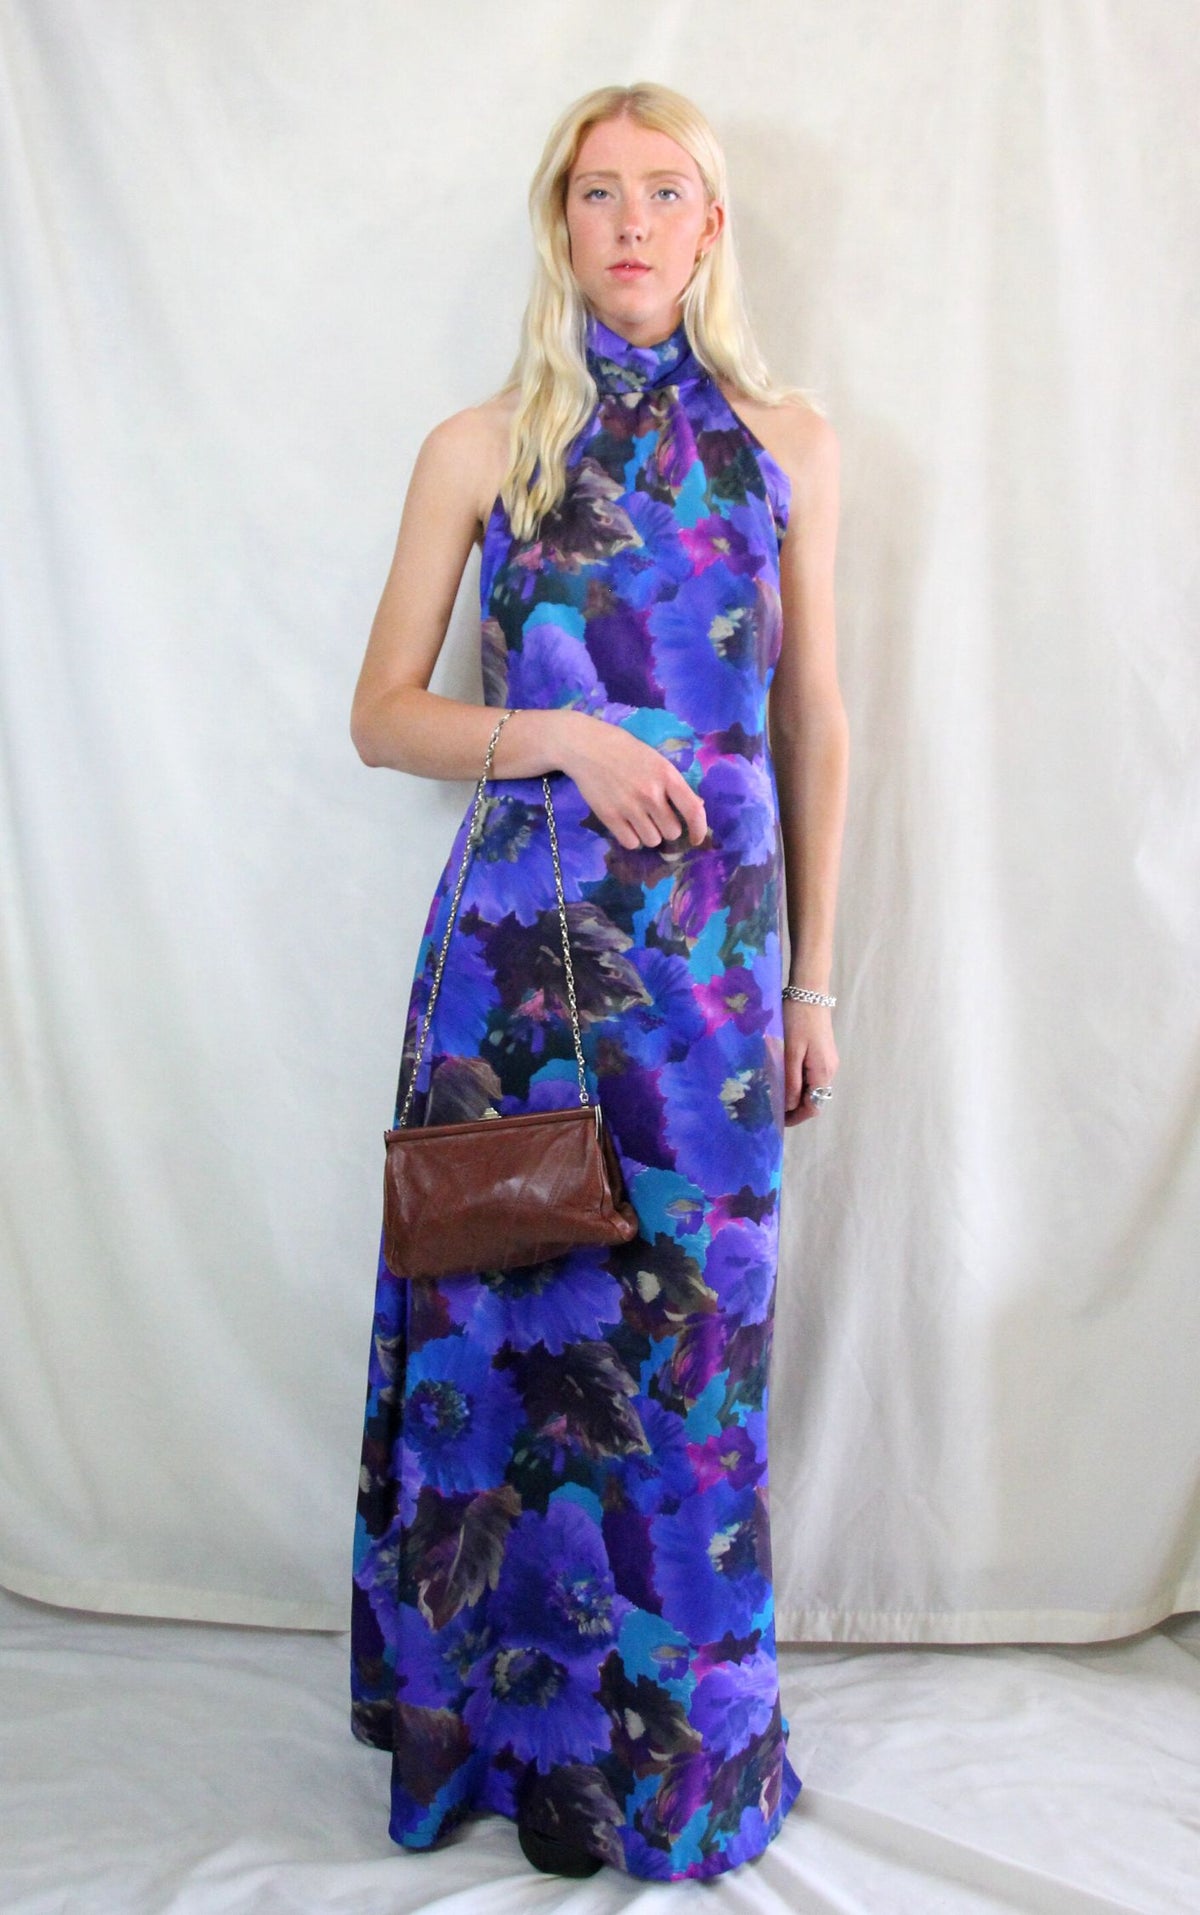 Rent vintage floral maxi dress handmade from recycled materials by WearMyWardrobeOut